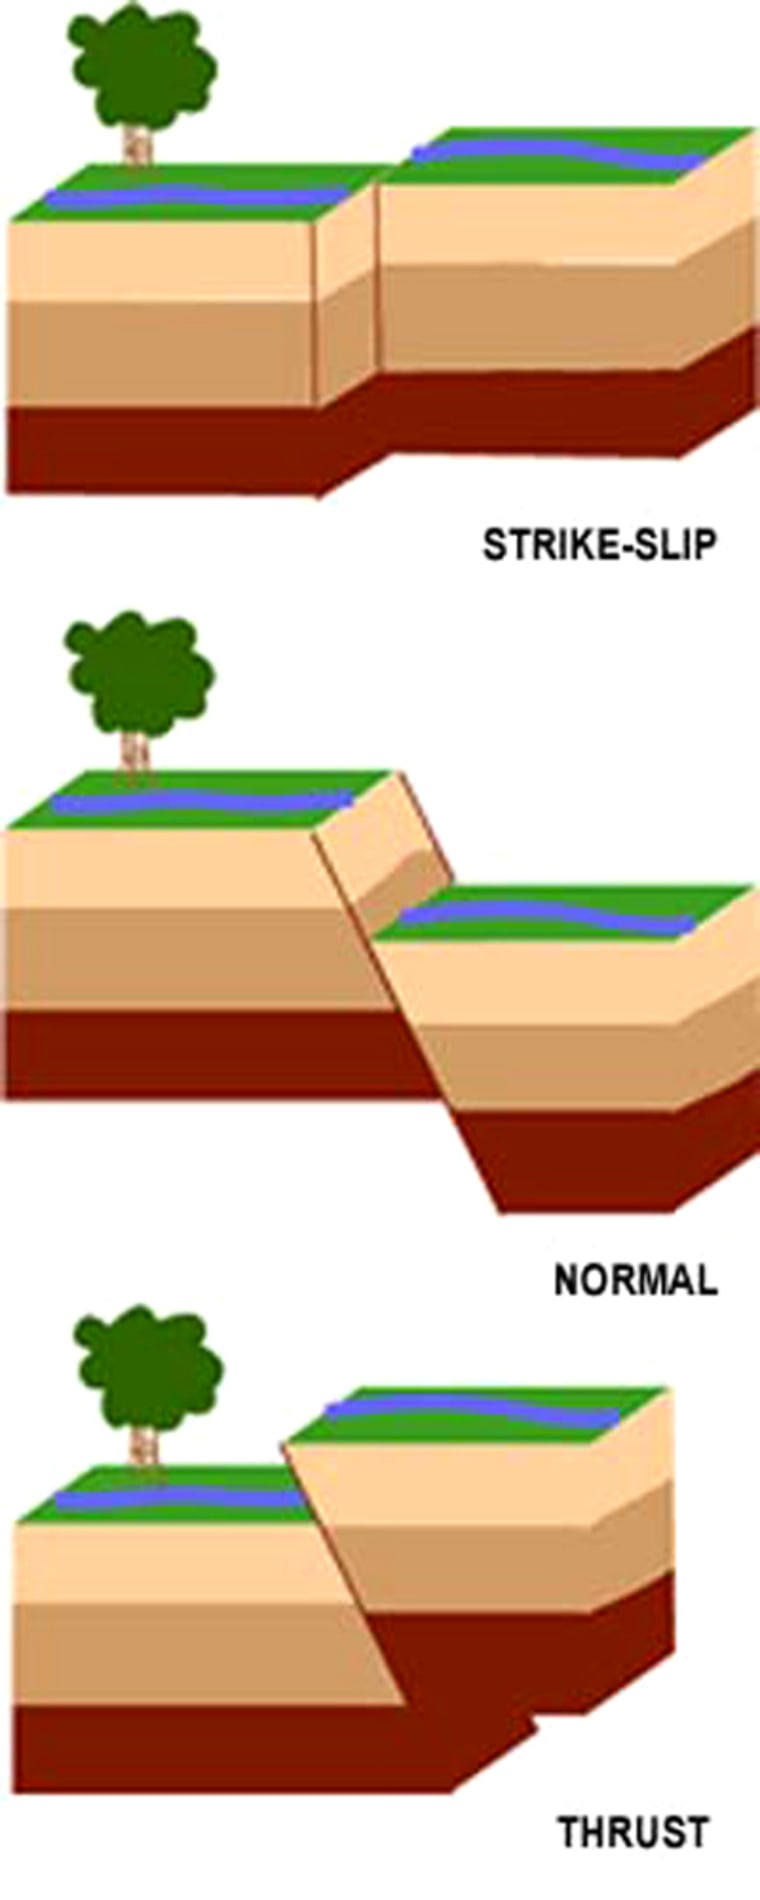 Strike-slip faults move horizontally. Normal and reverse faults involve vertical movement. Thrust faults involve angled vertical movement.